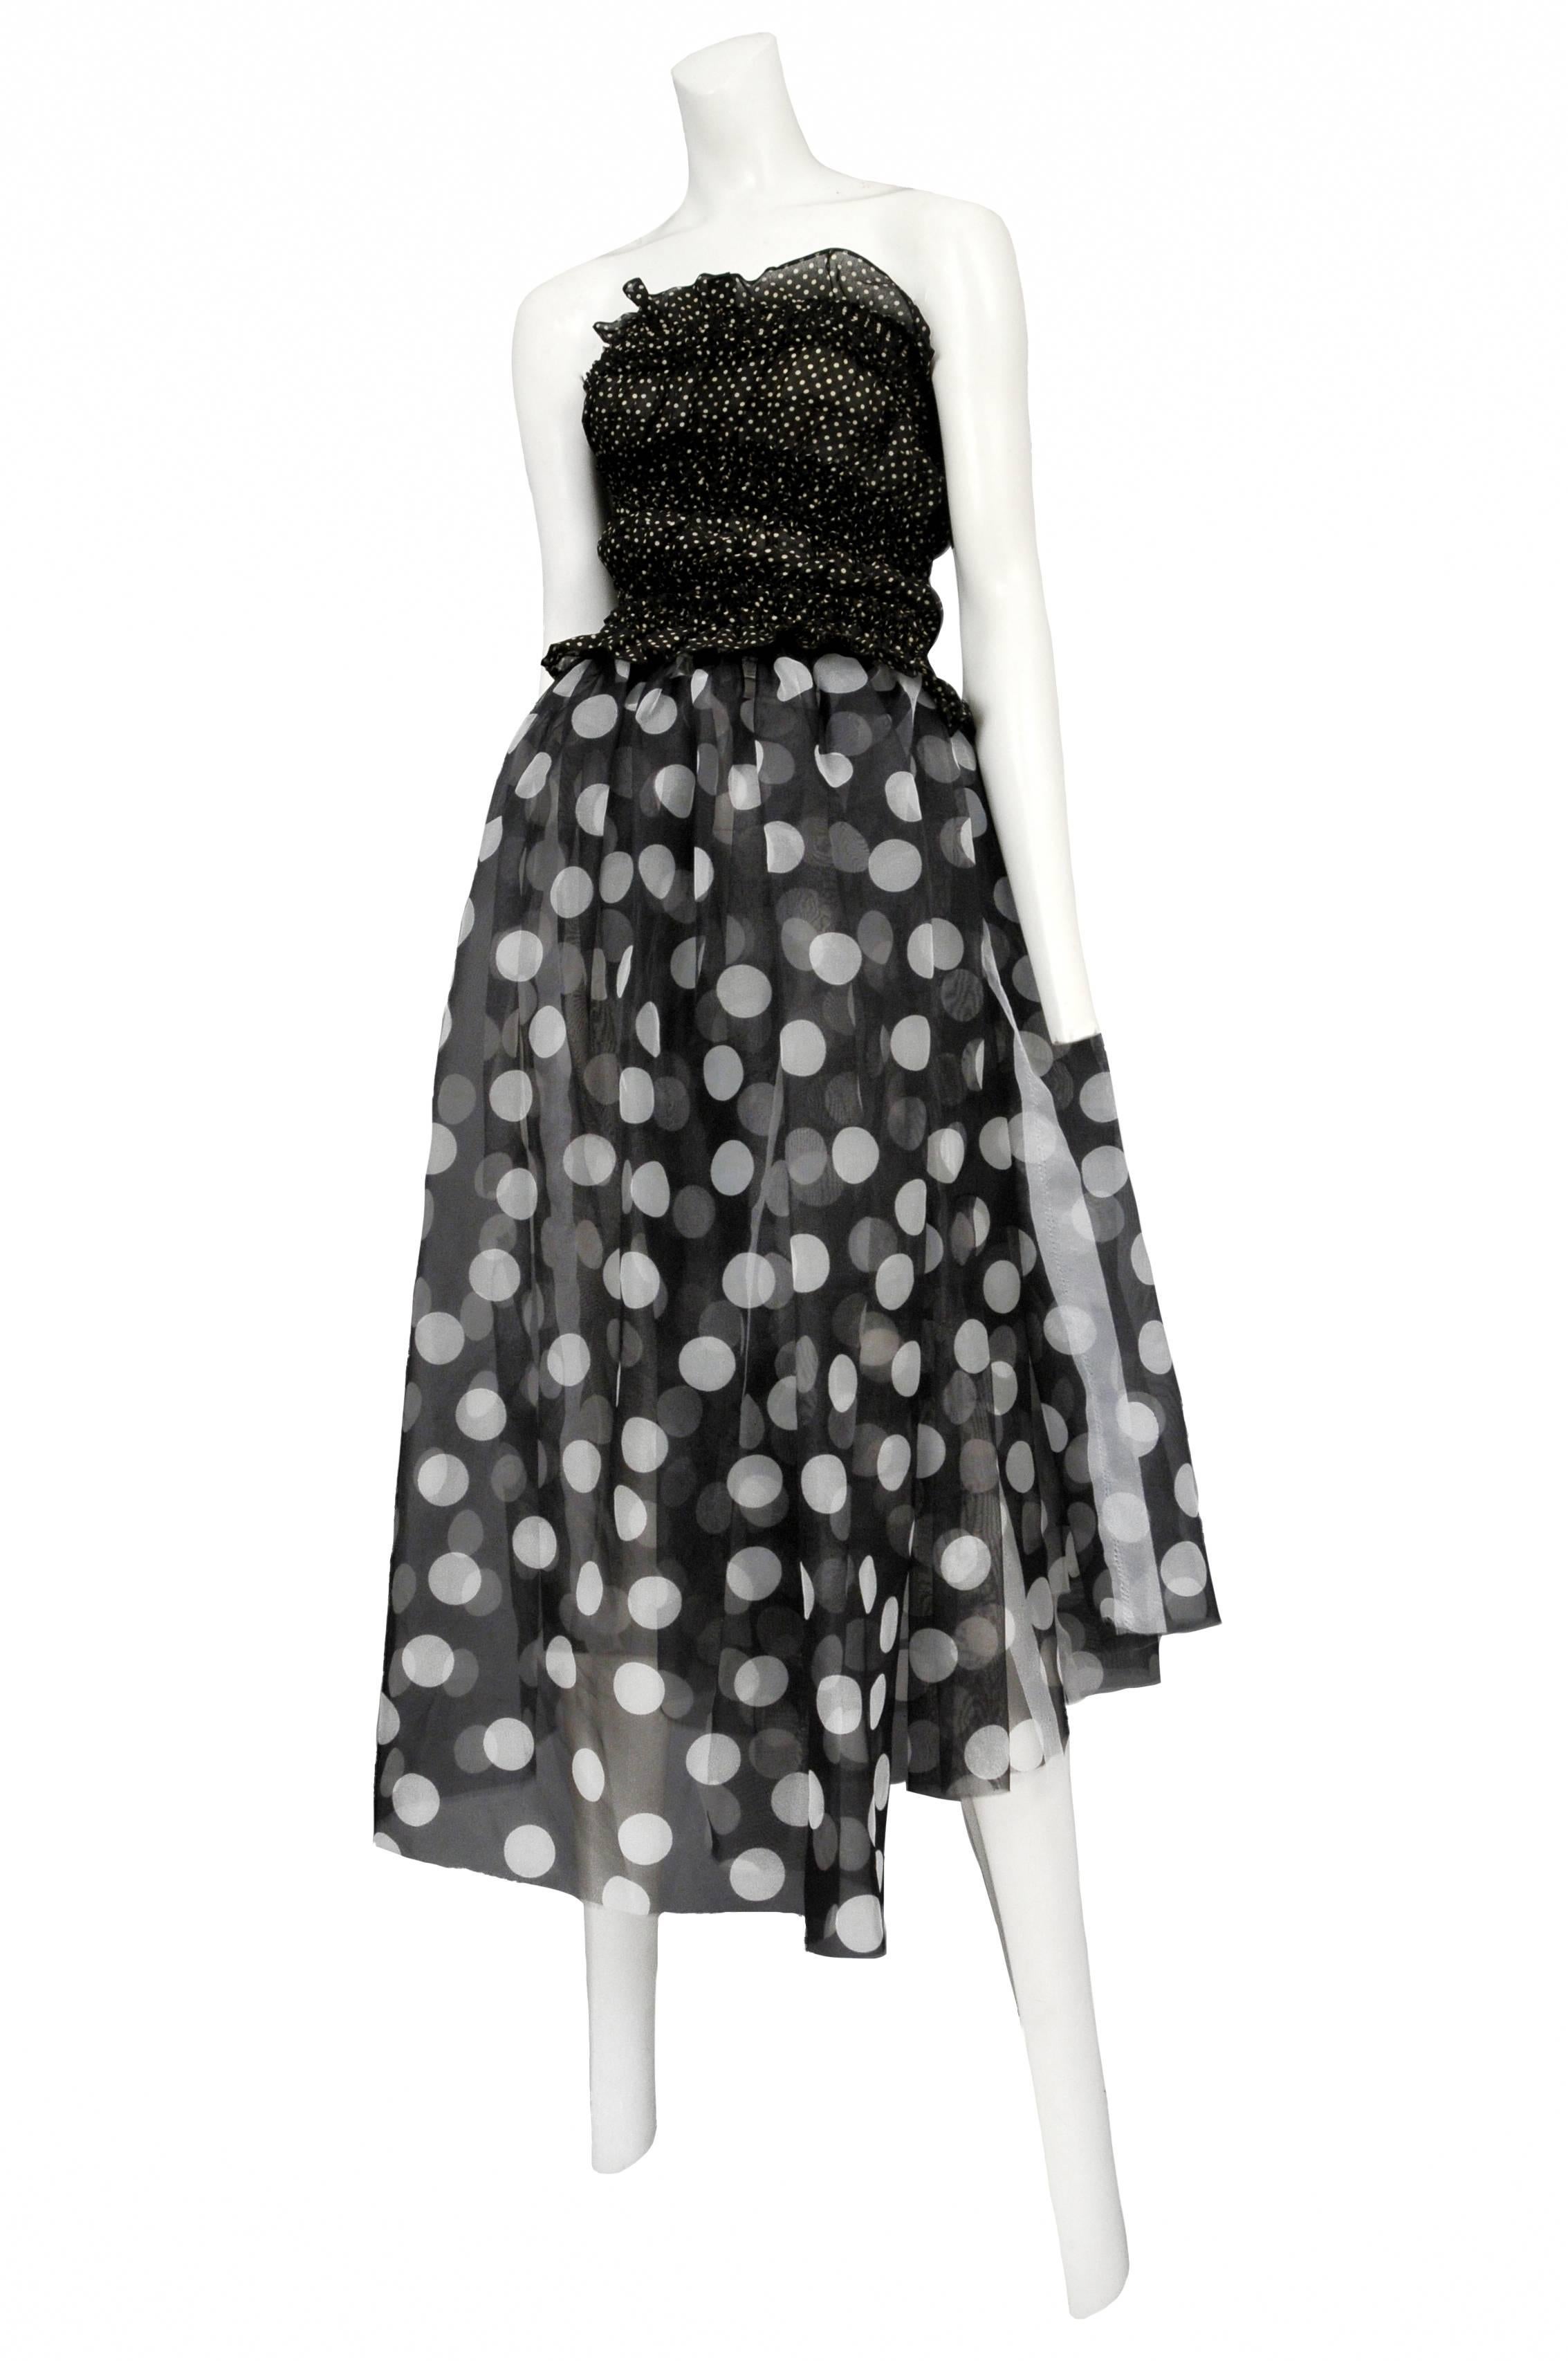 Tao for Comme Des Garcons SS 2011 polka dot organza ruched strapless dress with under slip. 
